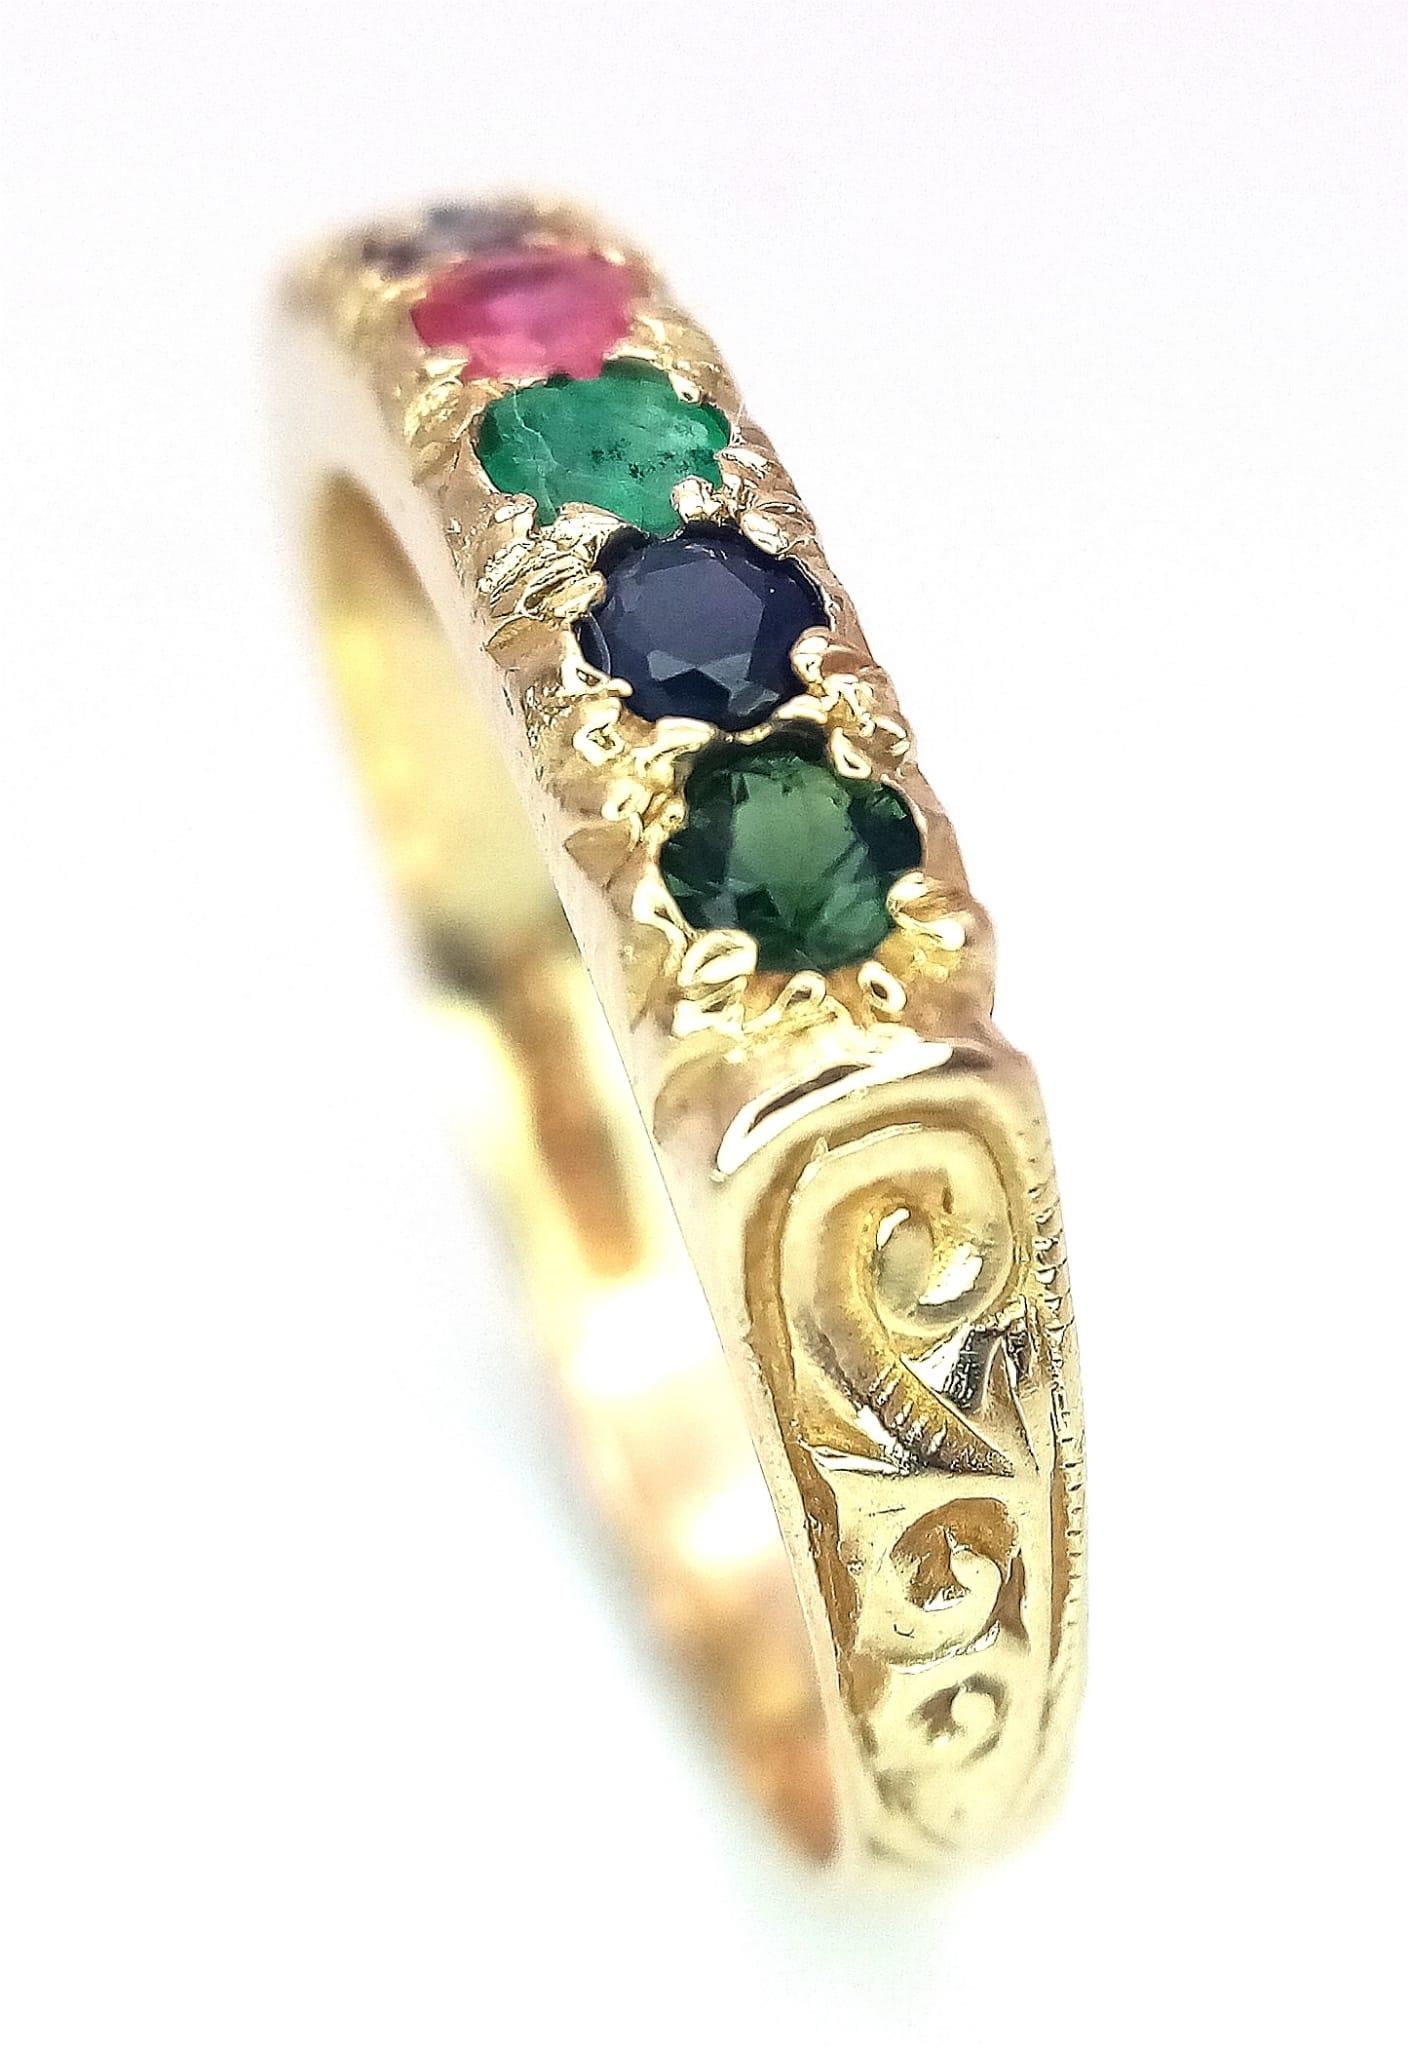 A PRETTY 9K YELLOW GOLD MULTI GEMSTONES SET DEAREST RING, WEIGHT 2.9G SIZE S - Image 6 of 11